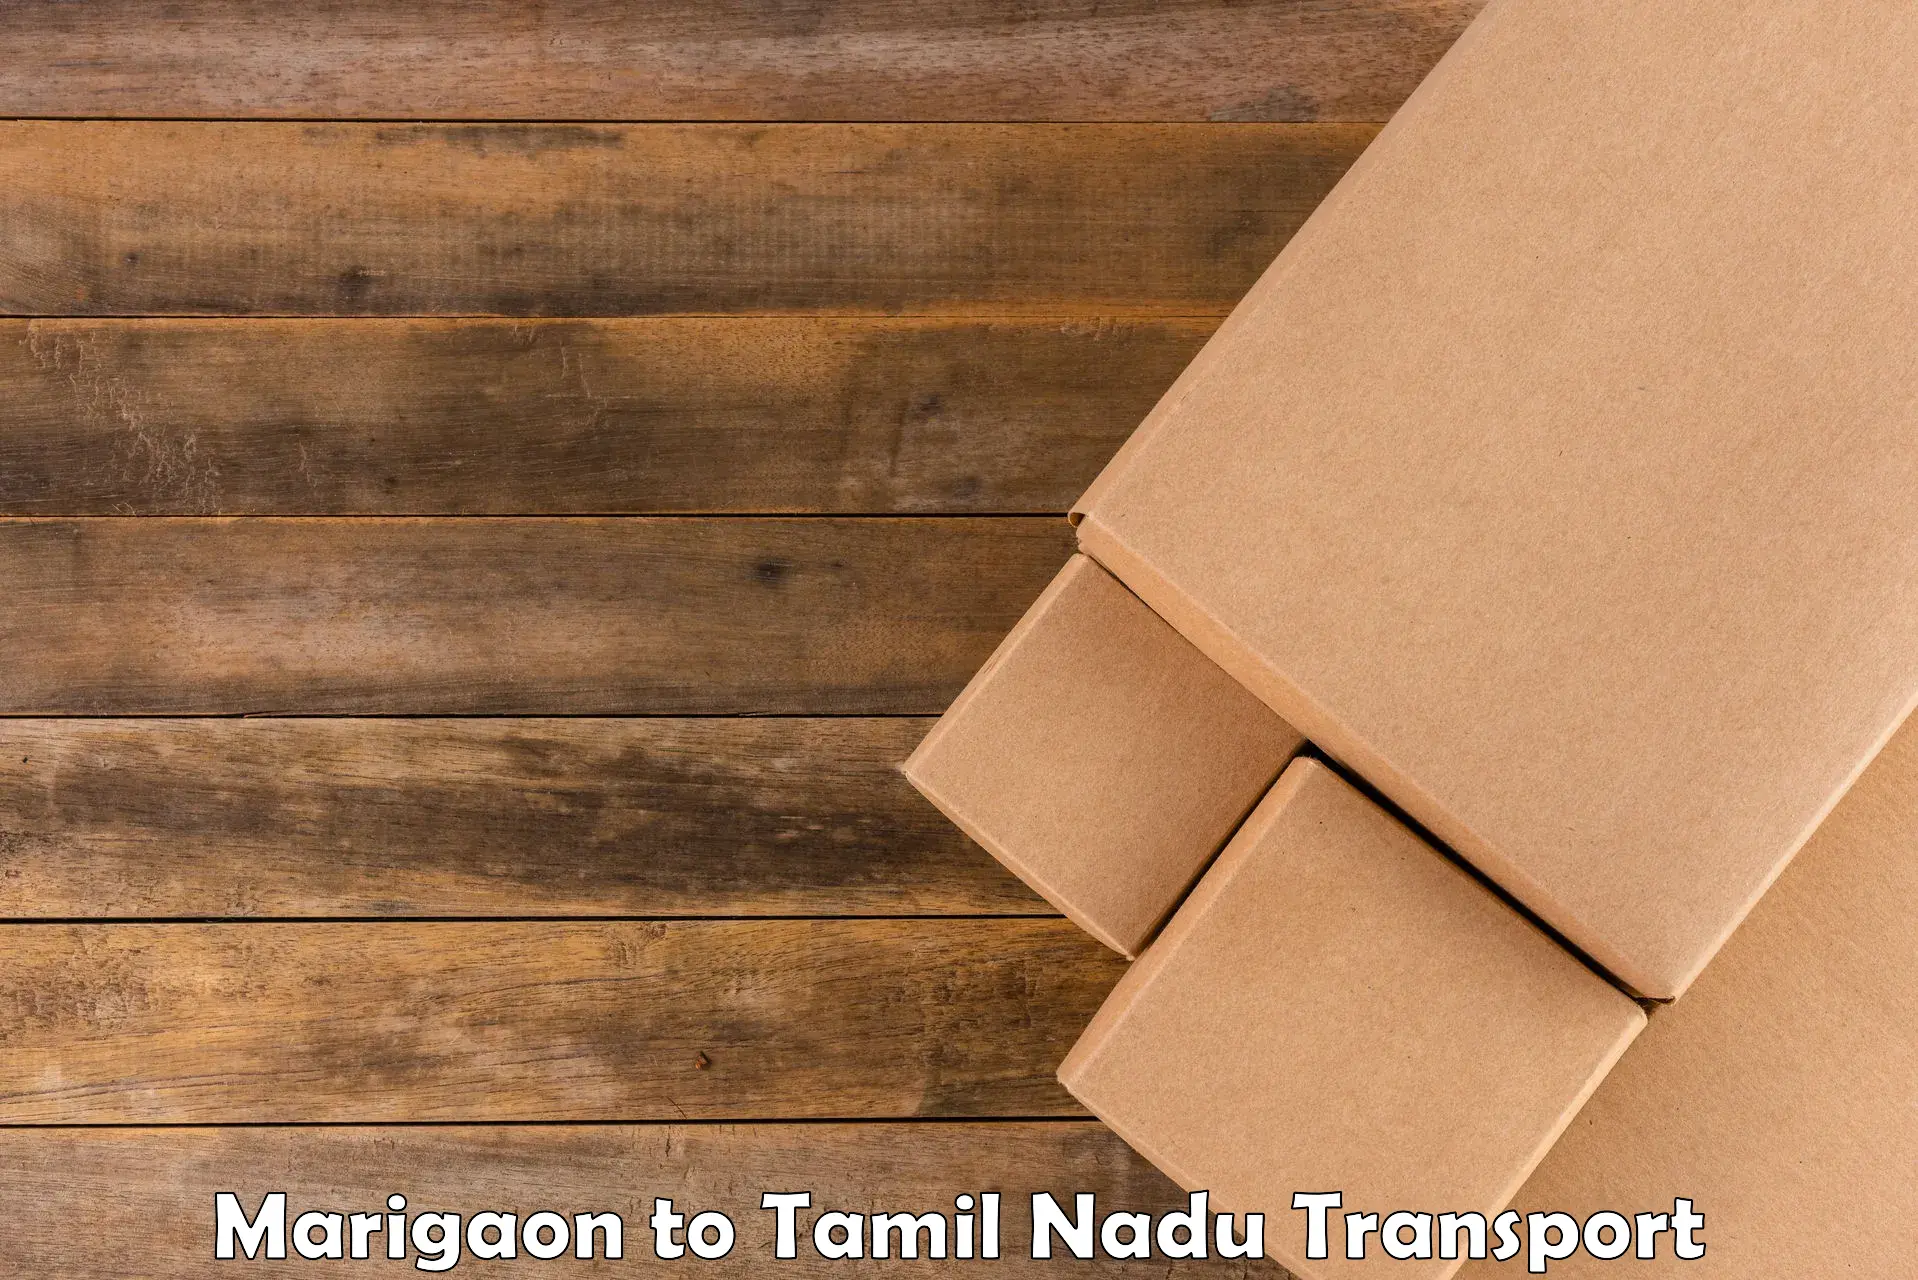 Interstate transport services Marigaon to Shanmugha Arts Science Technology and Research Academy Thanjavur